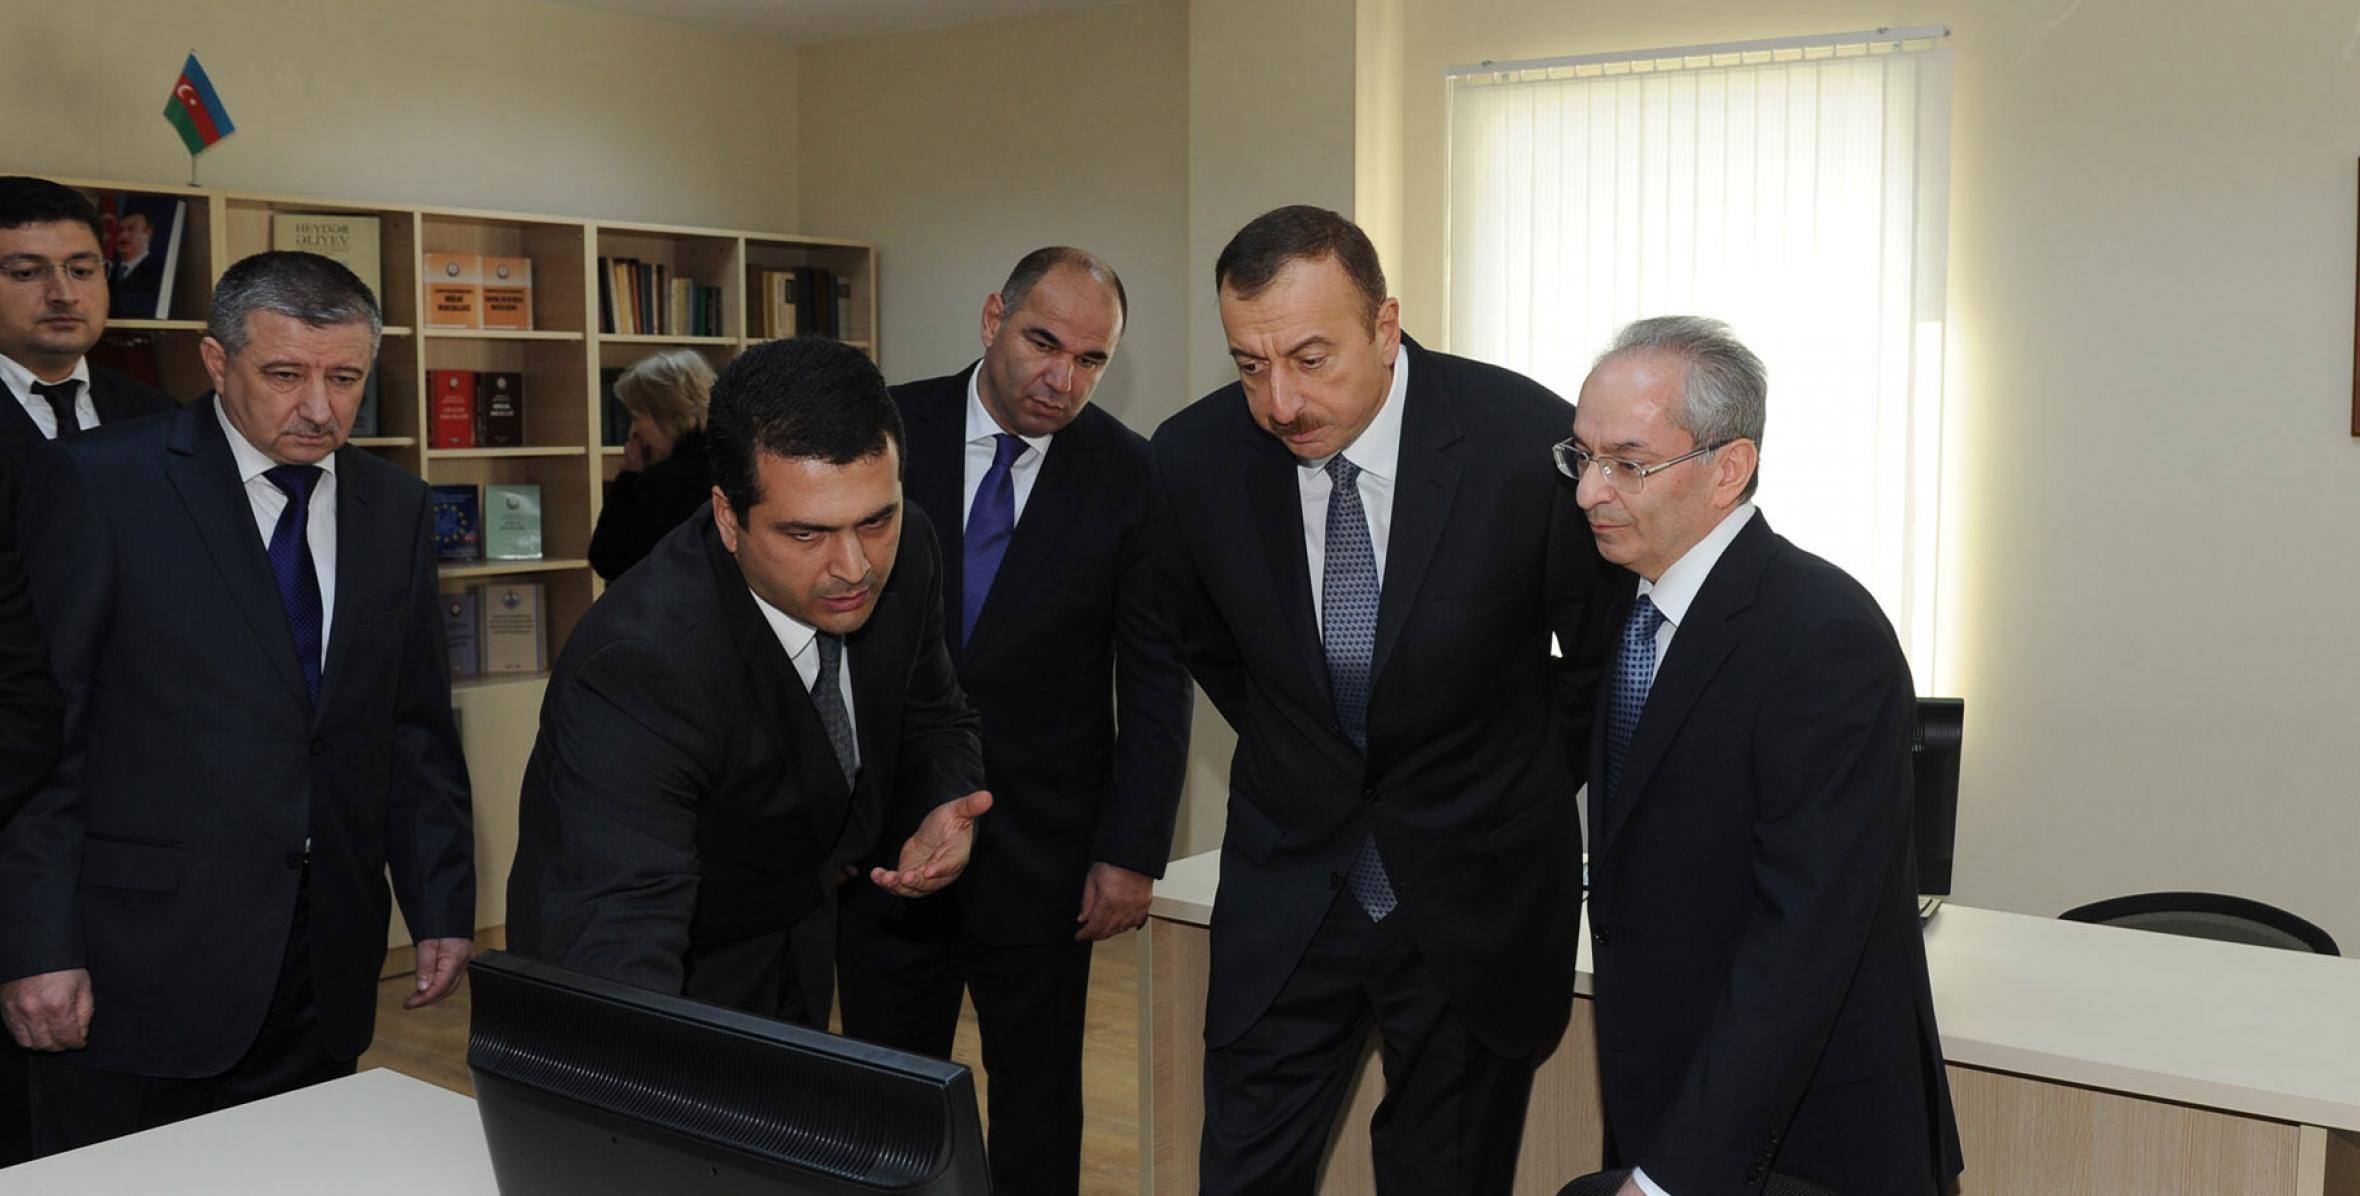 As part of a visit to Oguz District, Ilham Aliyev attended the opening of an office building of the district court